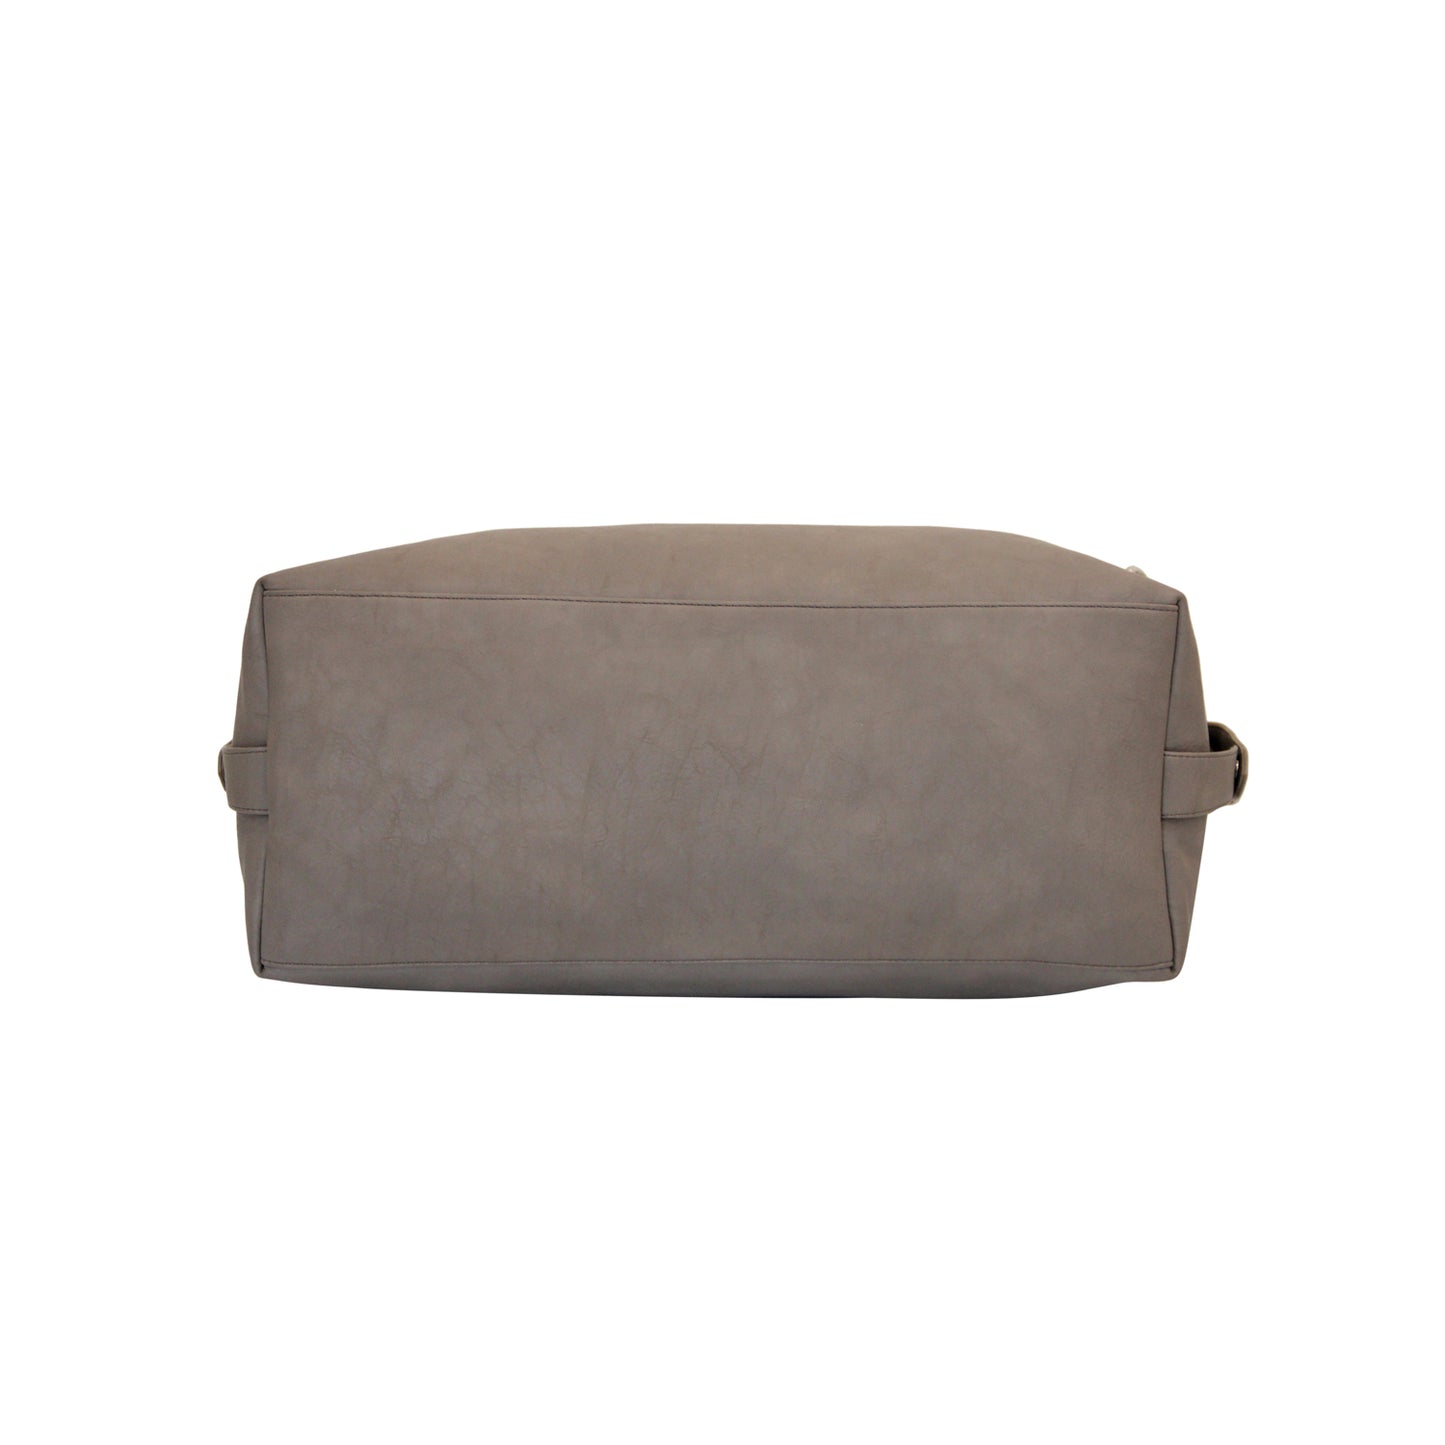 Grey Faux Leather Duffle